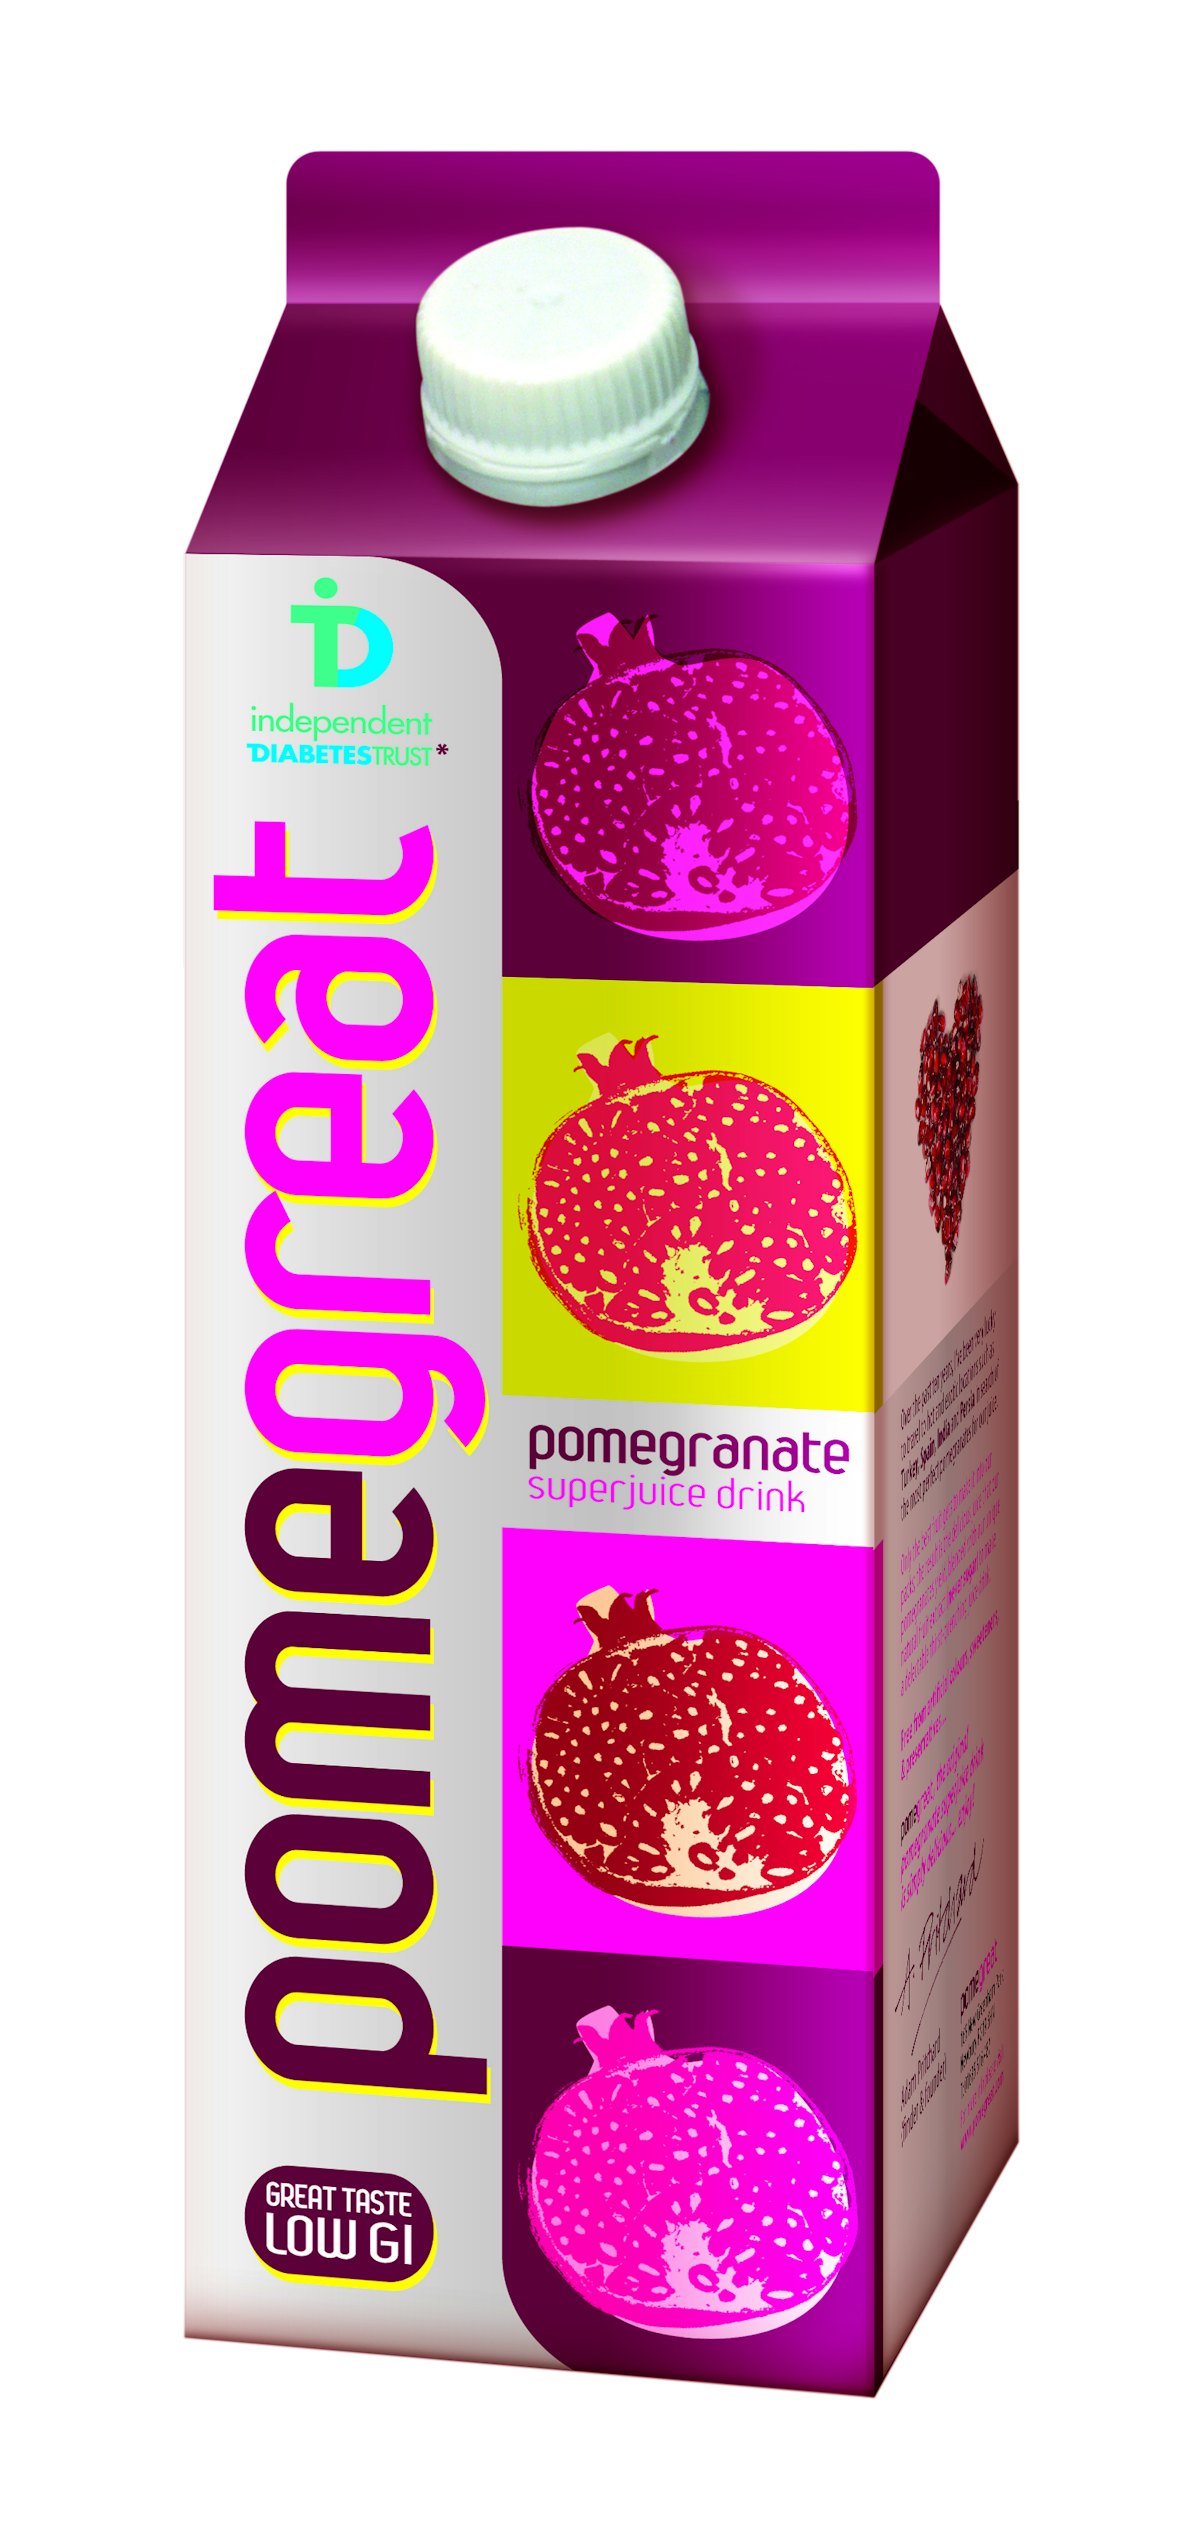 https://img.packworld.com/files/base/pmmi/all/image/2014/12/pw_77497_pomegreat_ambient_pomegranate.png?auto=format%2Ccompress&fit=max&q=70&w=1200